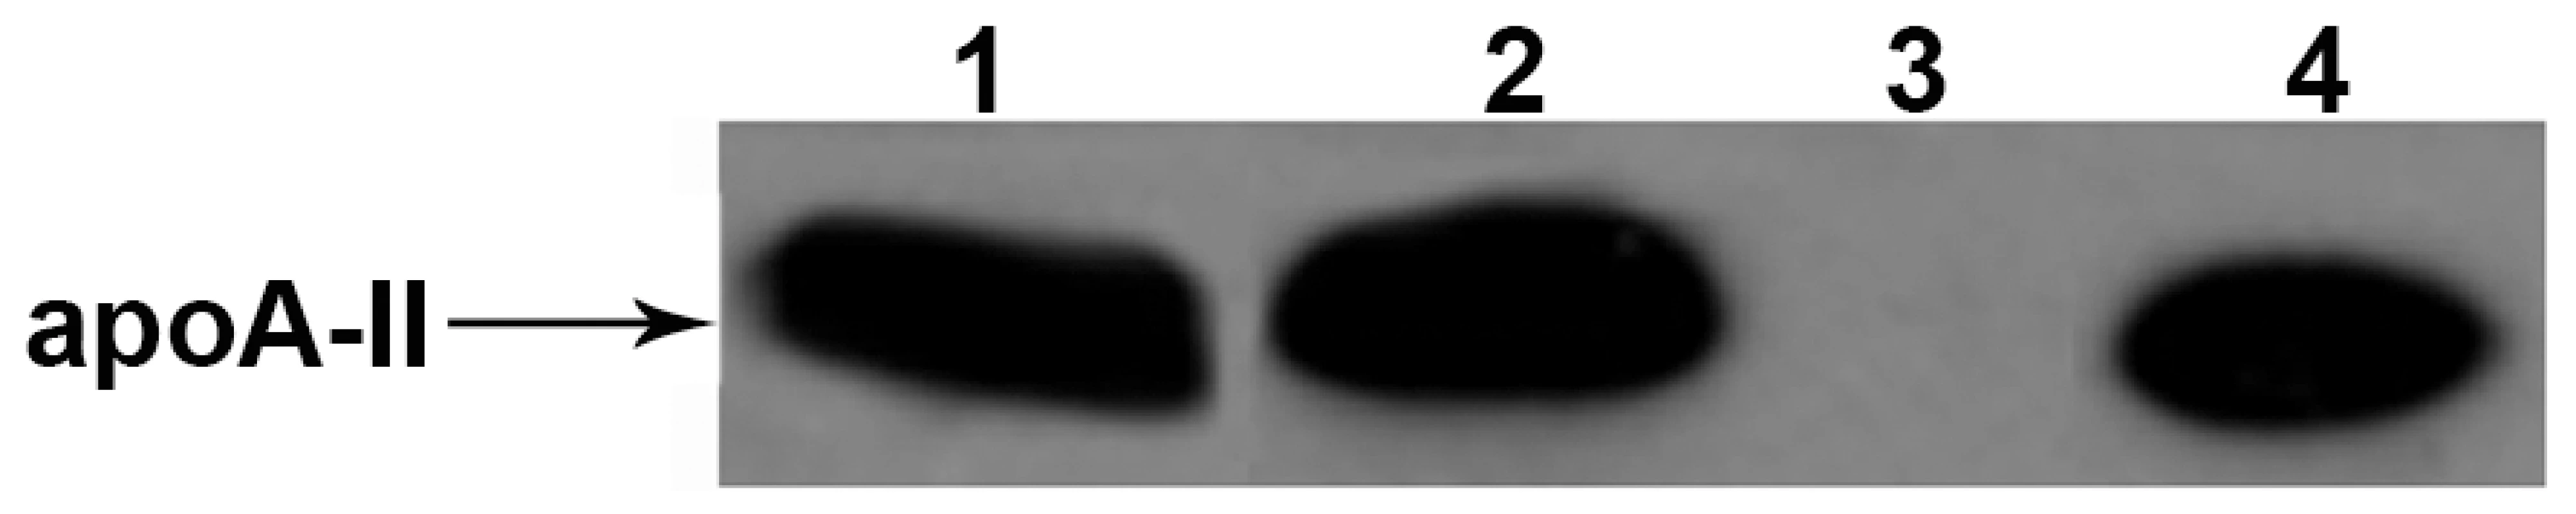 Western blot analysis of amyloid fibril fractions extracted from muscles used for secondary transmission.